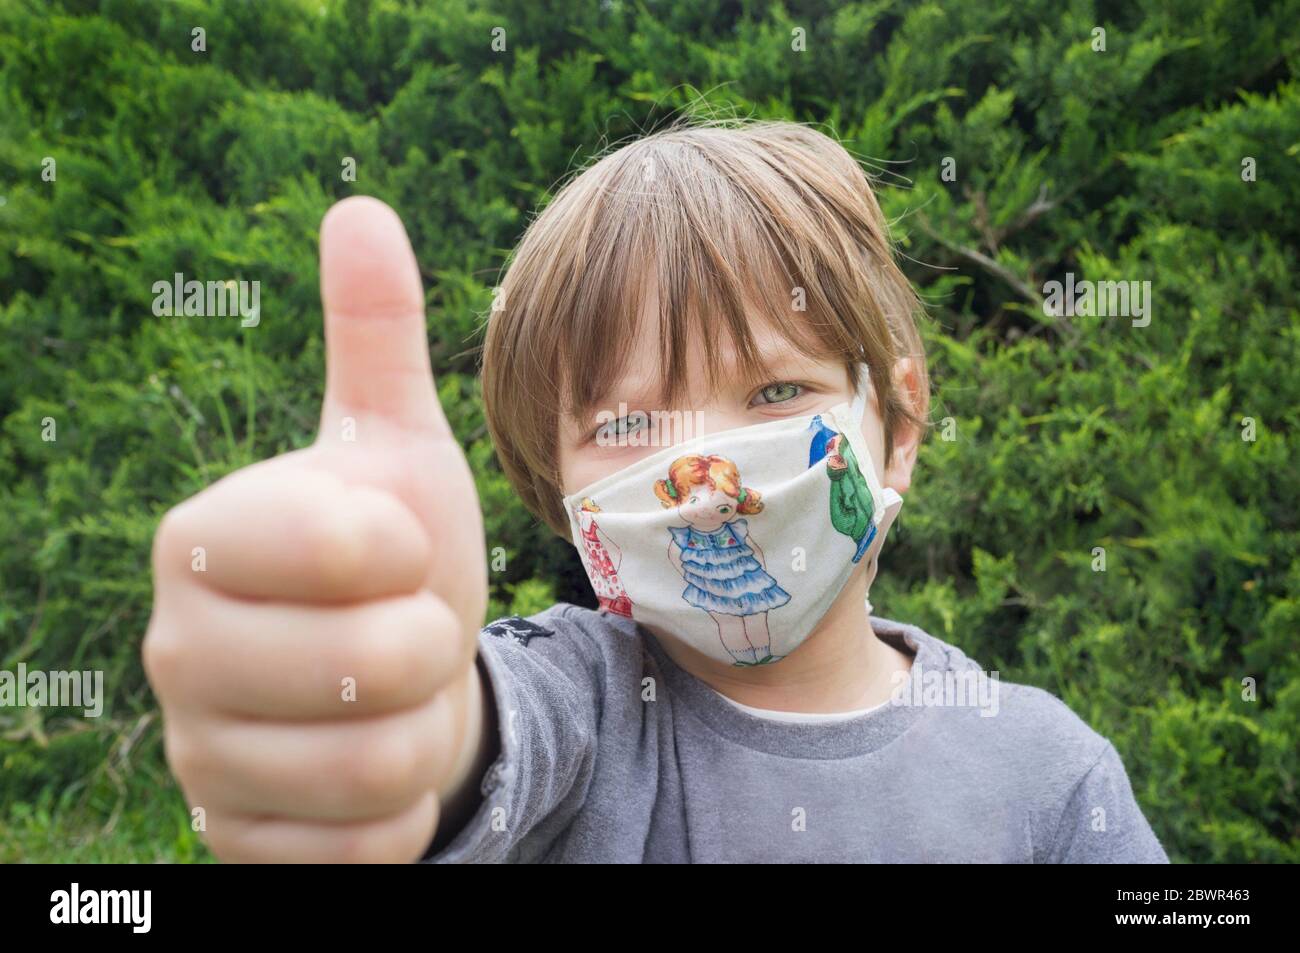 4 years little boy wearing a face mask print with children motifs. He is dooing the thumbs up gesture. Stock Photo